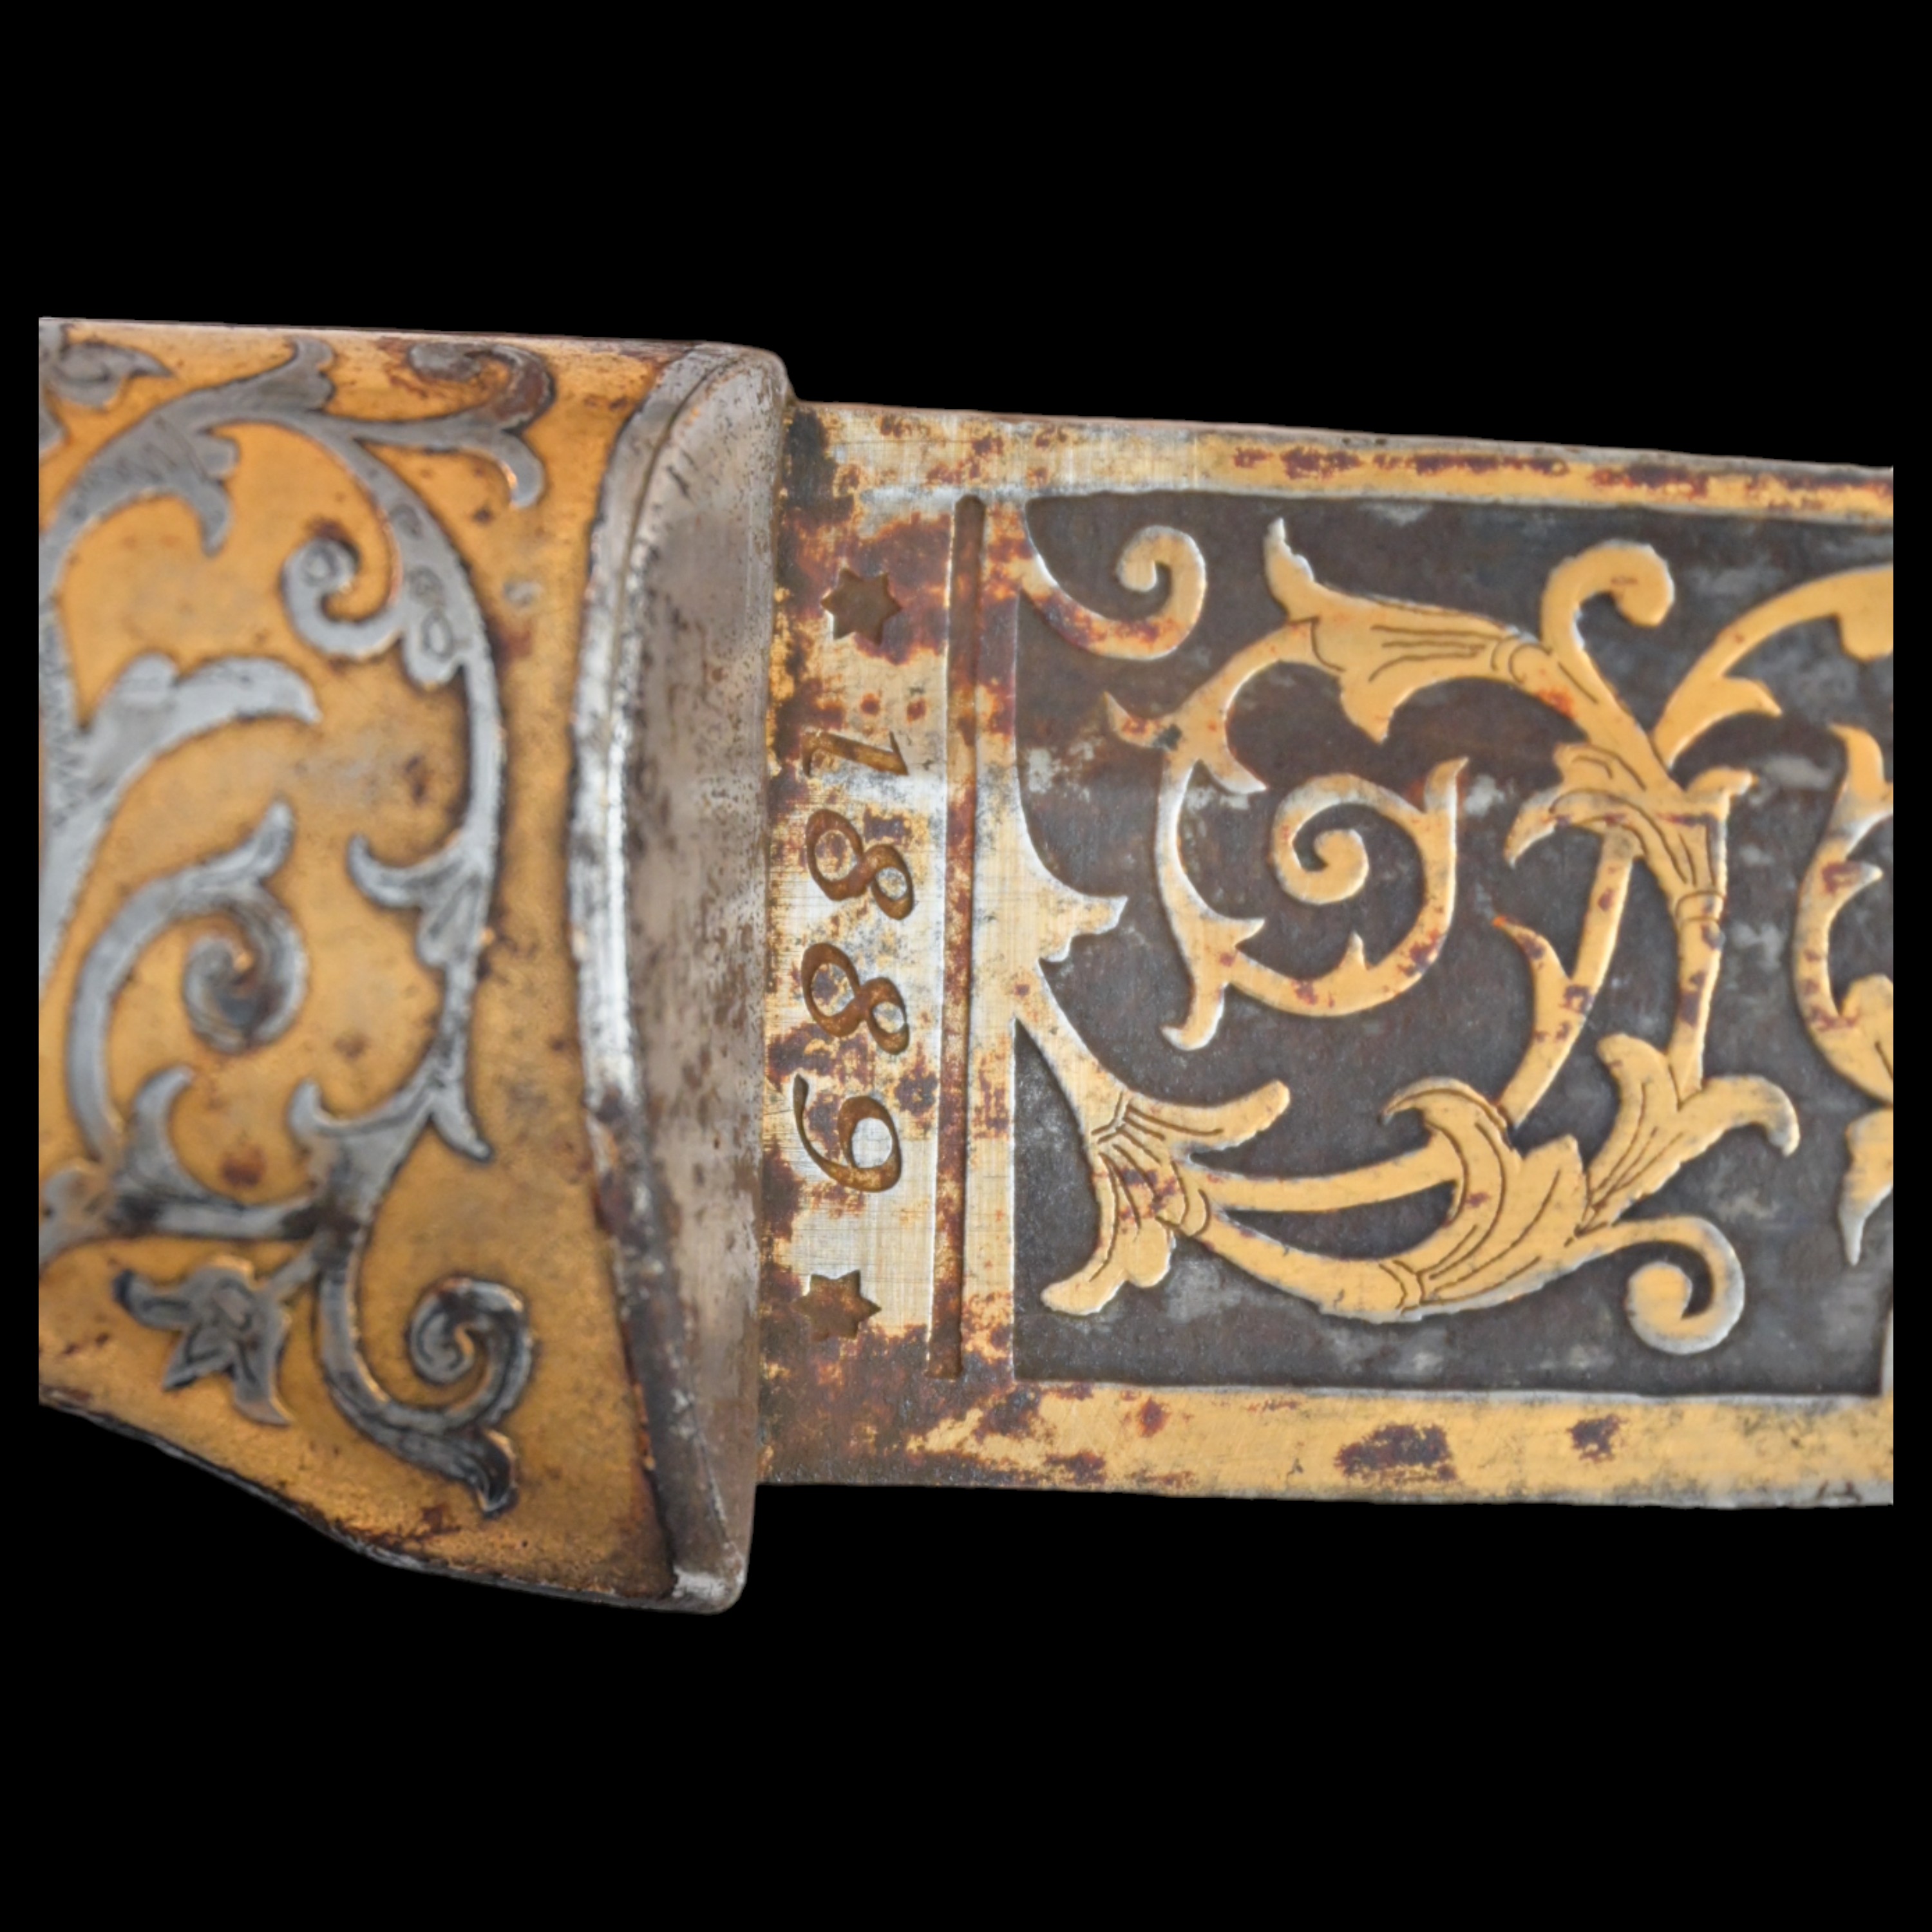 RARE HUNTING KNIFE, DECORATED WITH GOLD AND BLUE, RUSSIAN EMPIRE, ZLATOUST, 1889. - Image 15 of 26